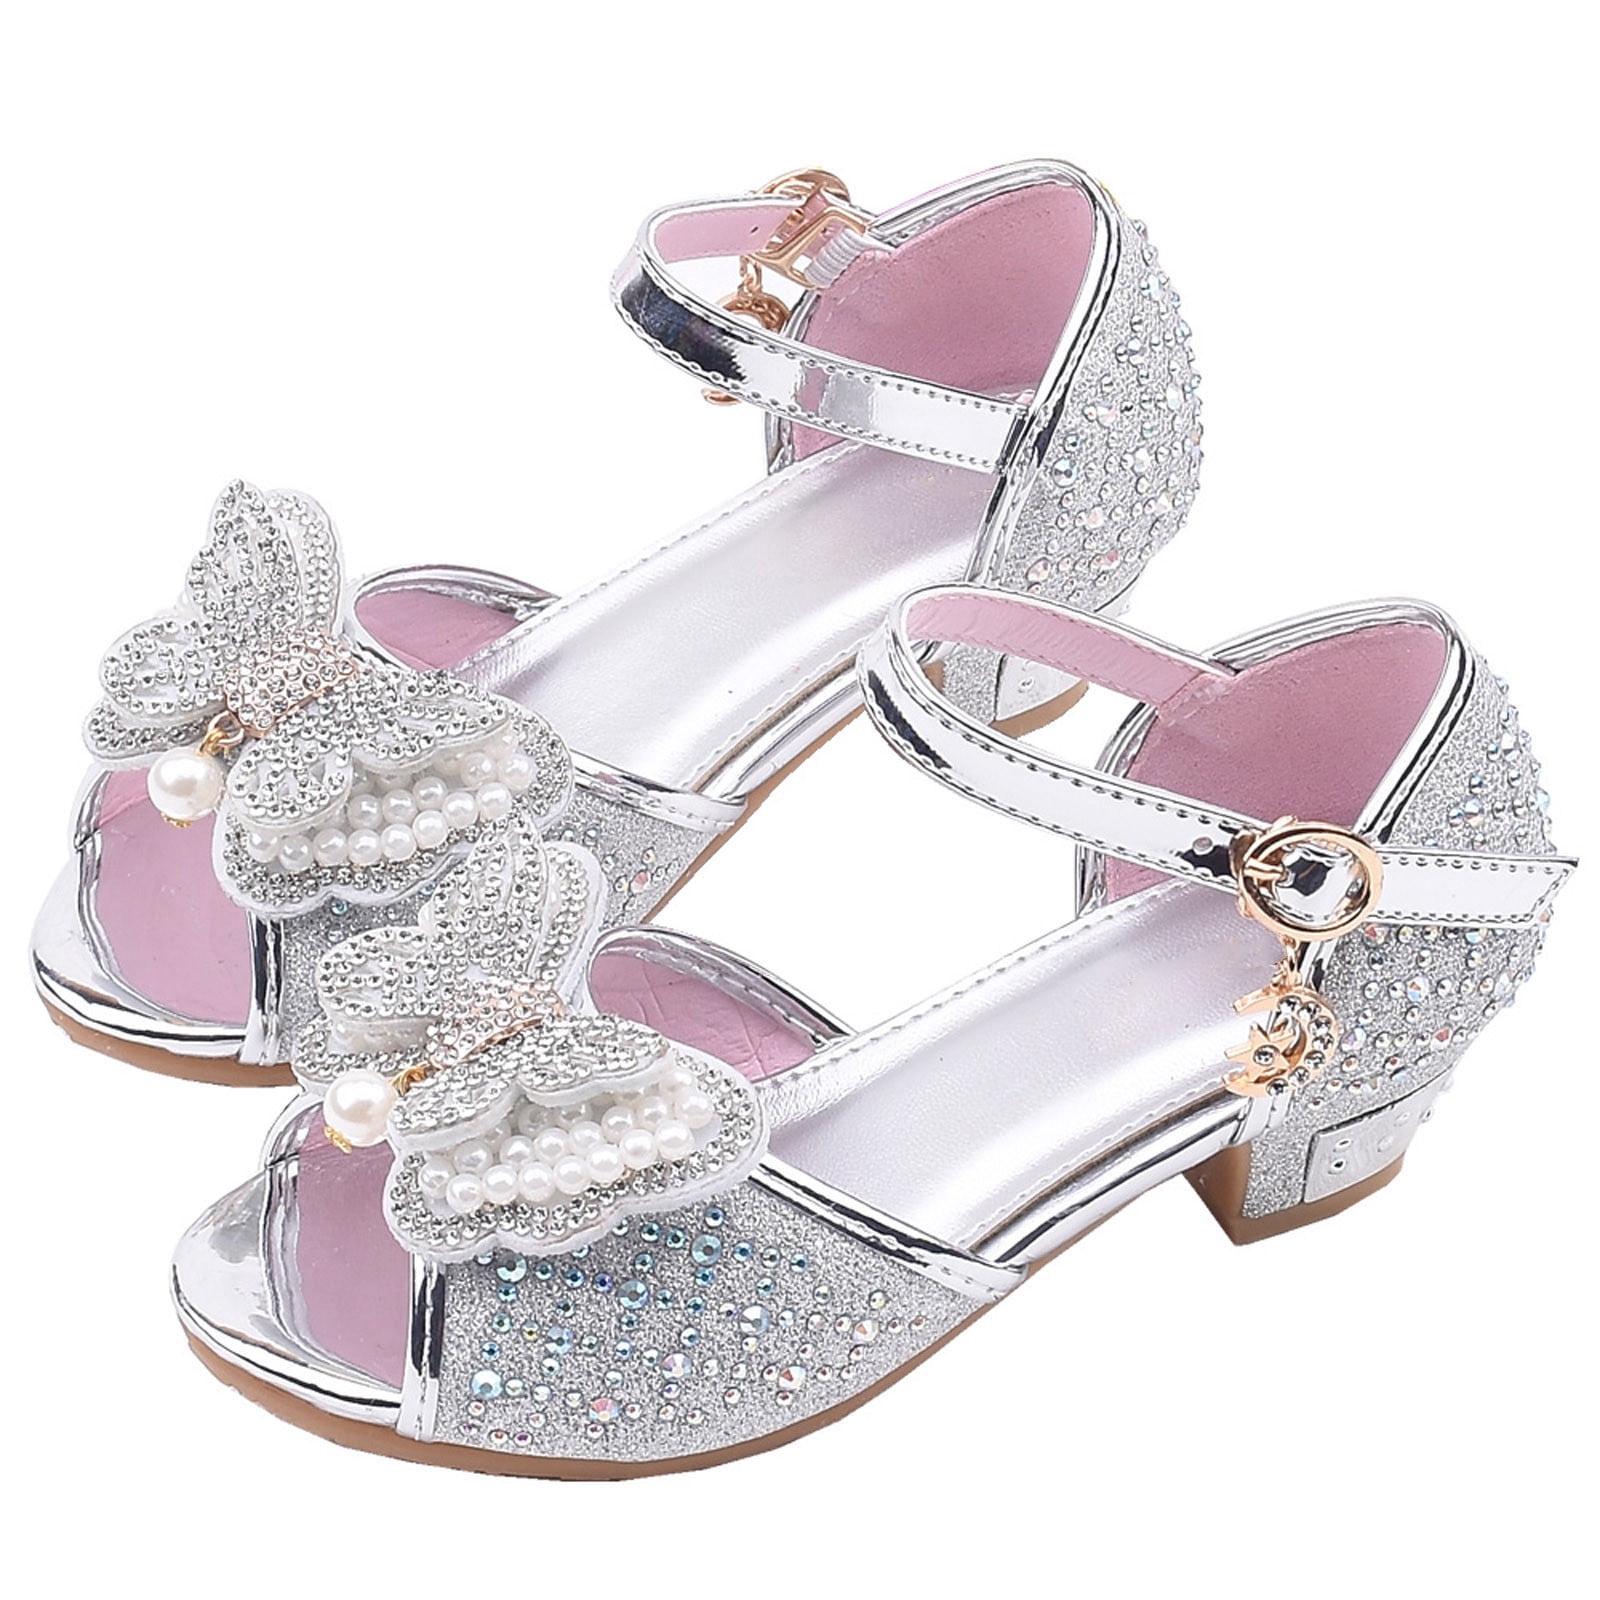 Aofany Girls Princess Glitter Low Heel Sandals Sweet Bow Dress Up Shoes ...